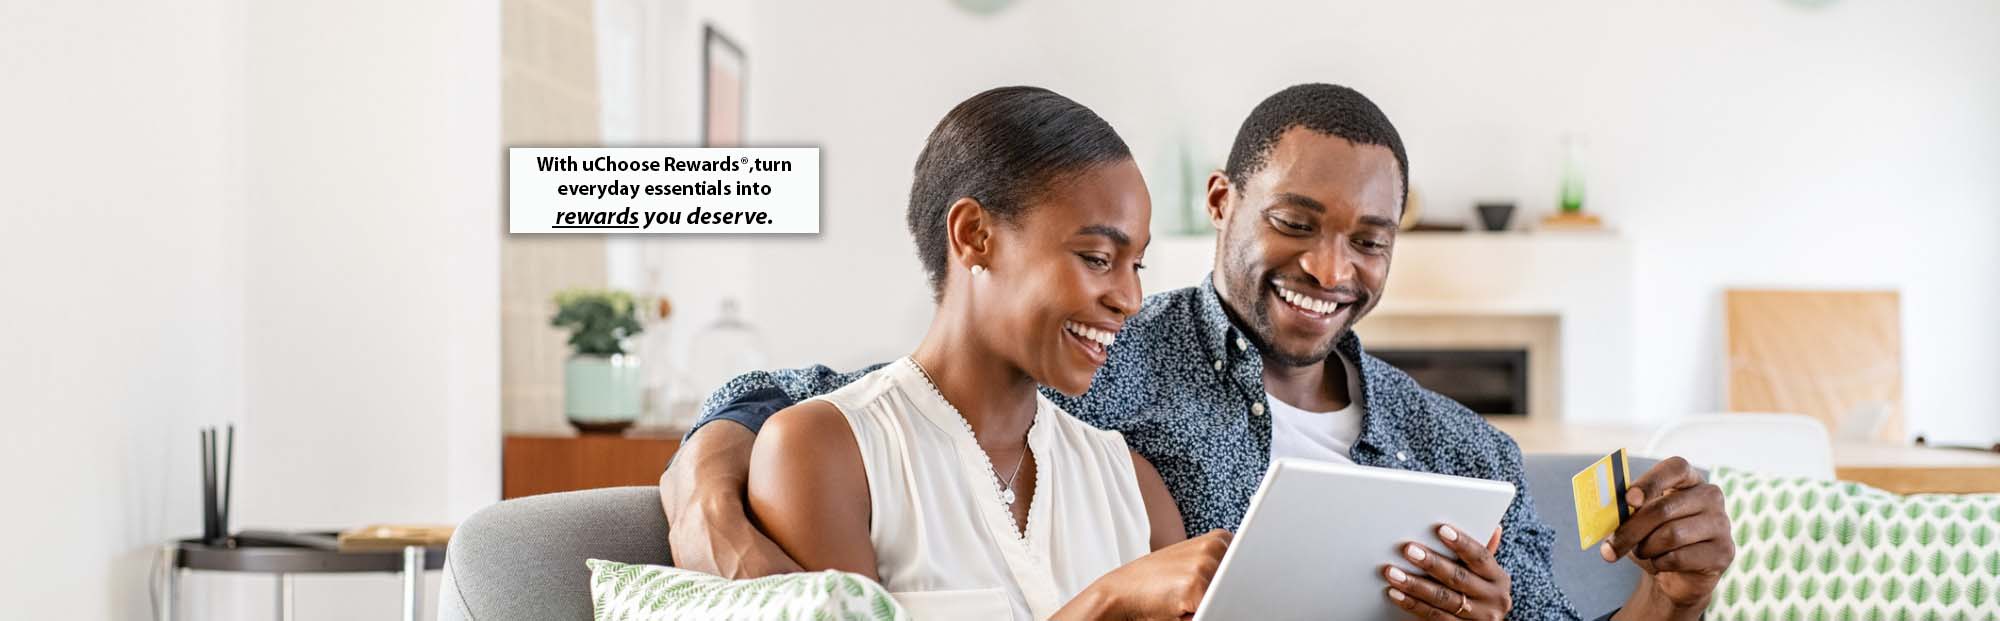 Smiling Couple Using Credit Card and Tablet